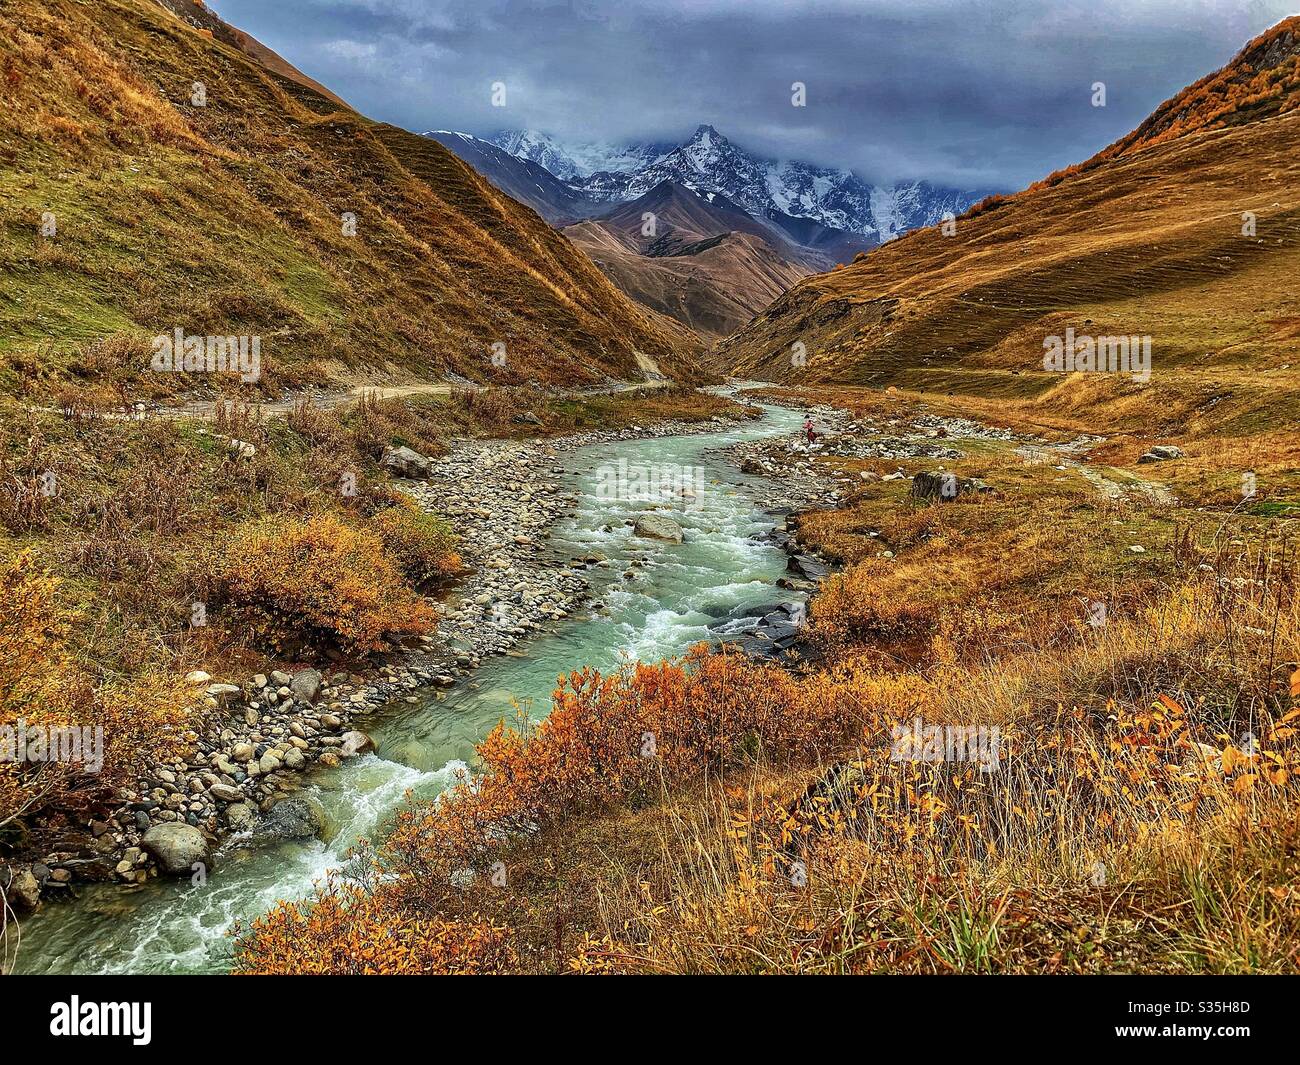 River running through a mountain valley covered in autumnal colours in the shadows of a snowy mountain peak in Ushguli, Georgia. Stock Photo